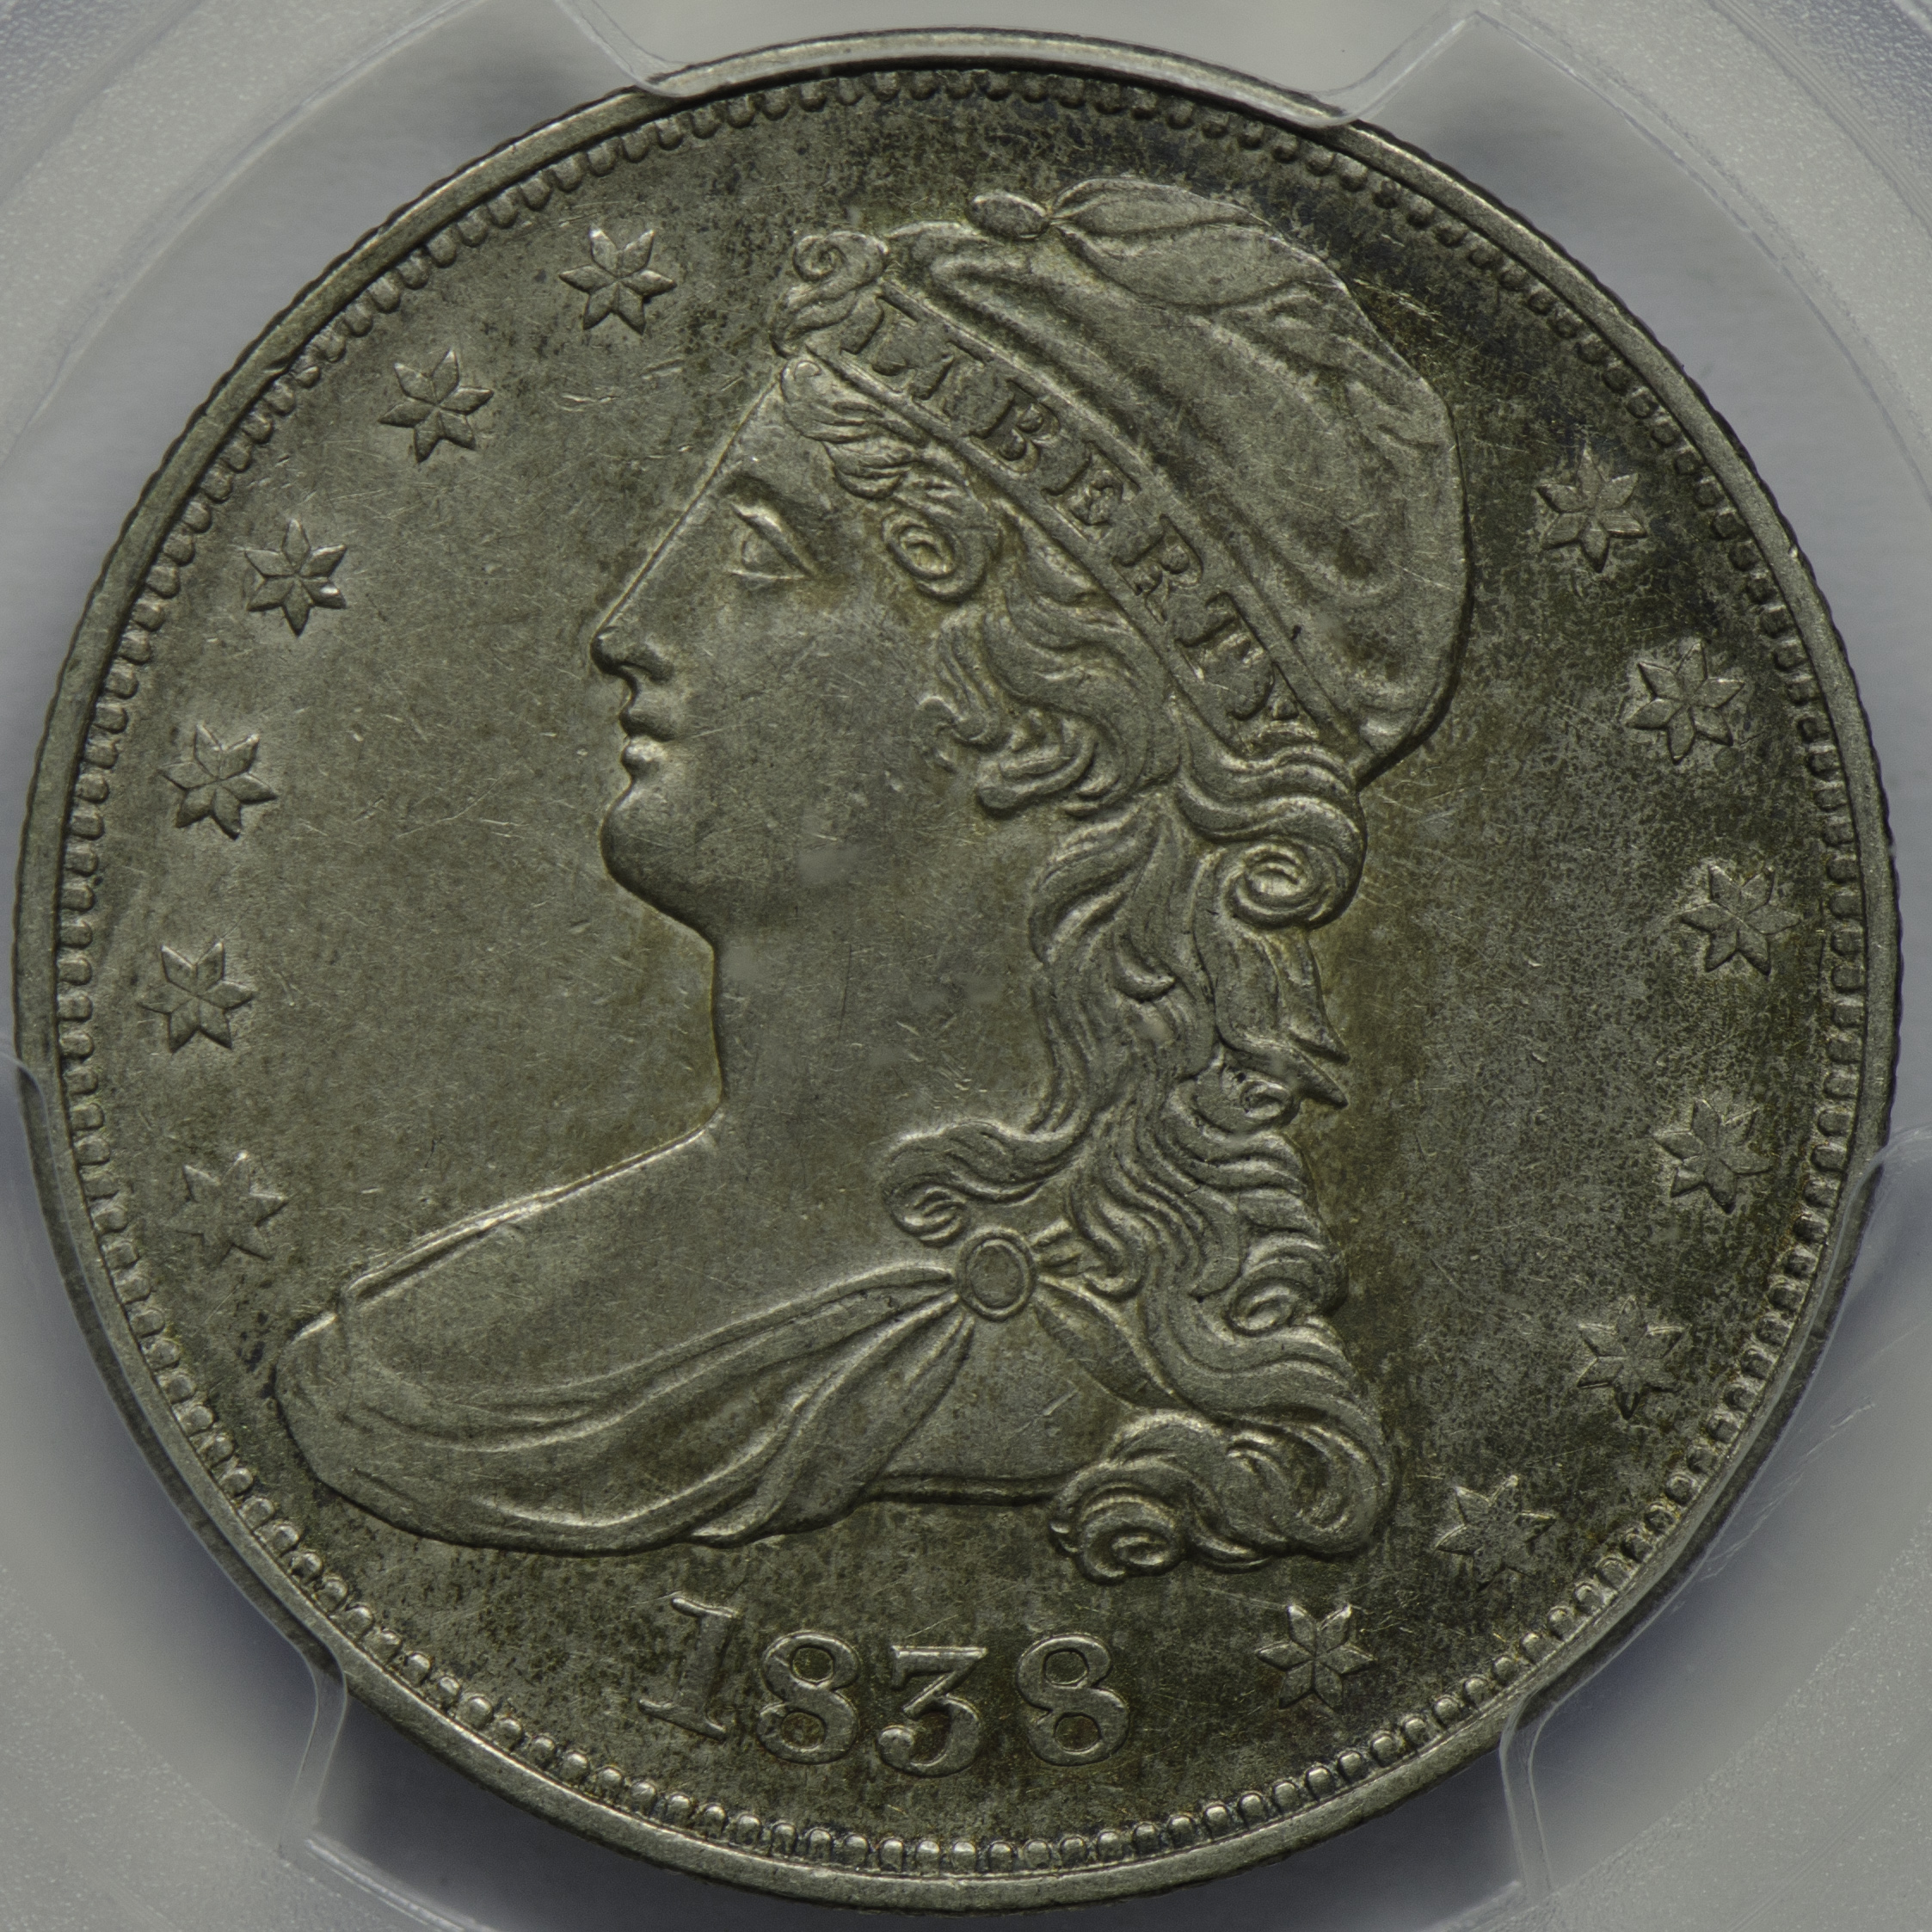 1838 HALF DOLLAR - CAPPED BUST, REEDED EDGE PCGS MS 45, CAC 50C Obv closeup f8 105mm-653.jpg